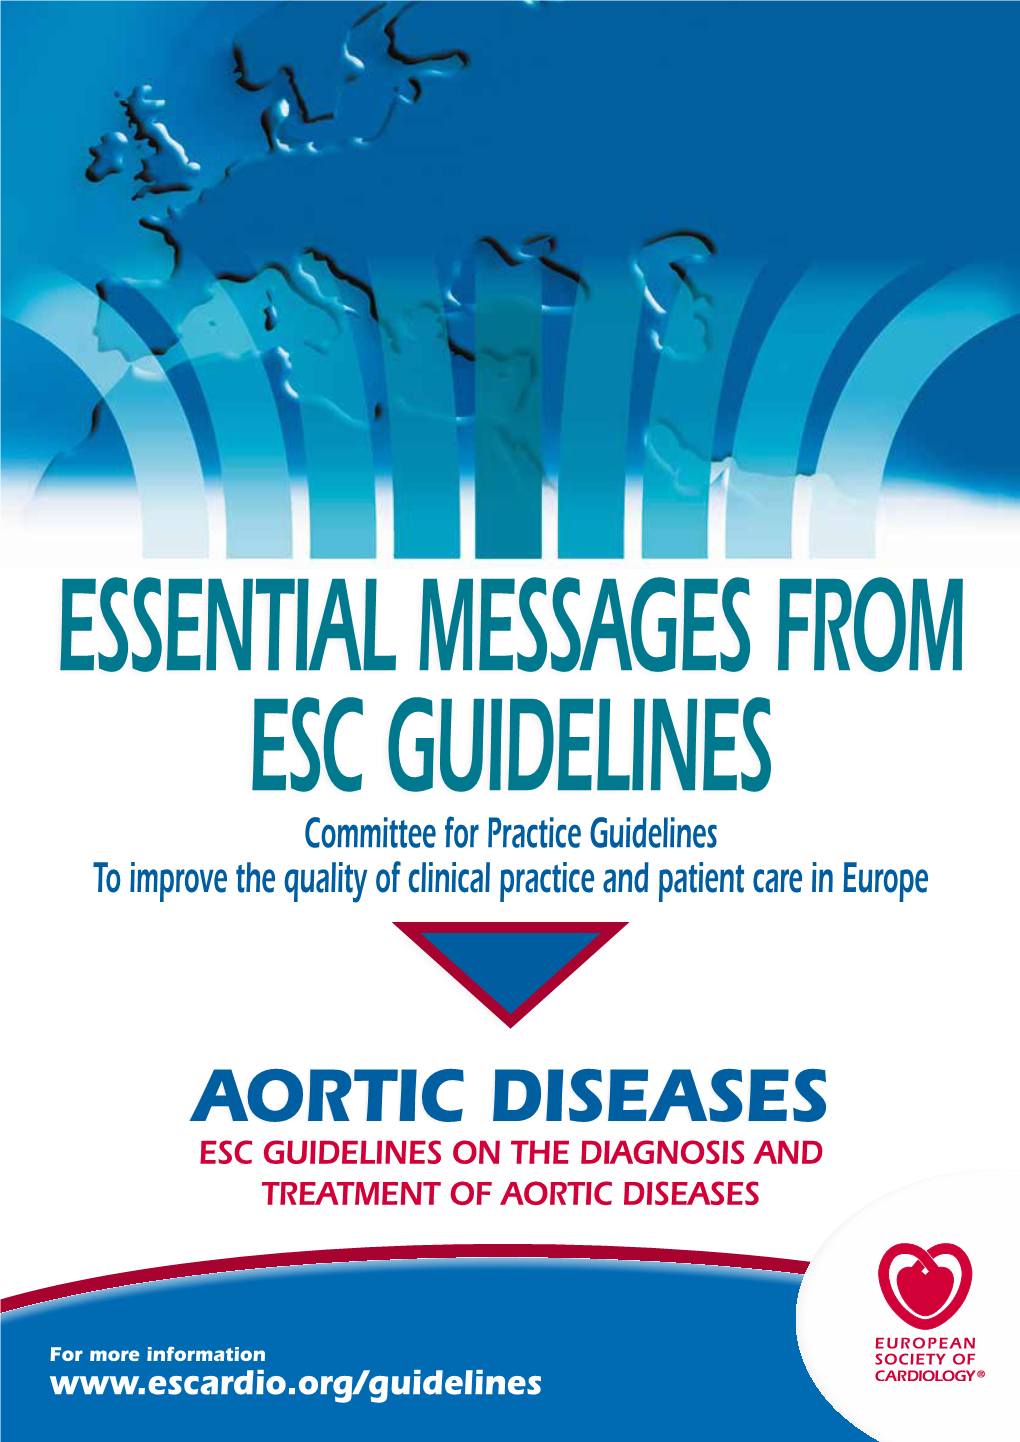 Aortic Diseases Esc Guidelines on the Diagnosis and Treatment of Aortic Diseases